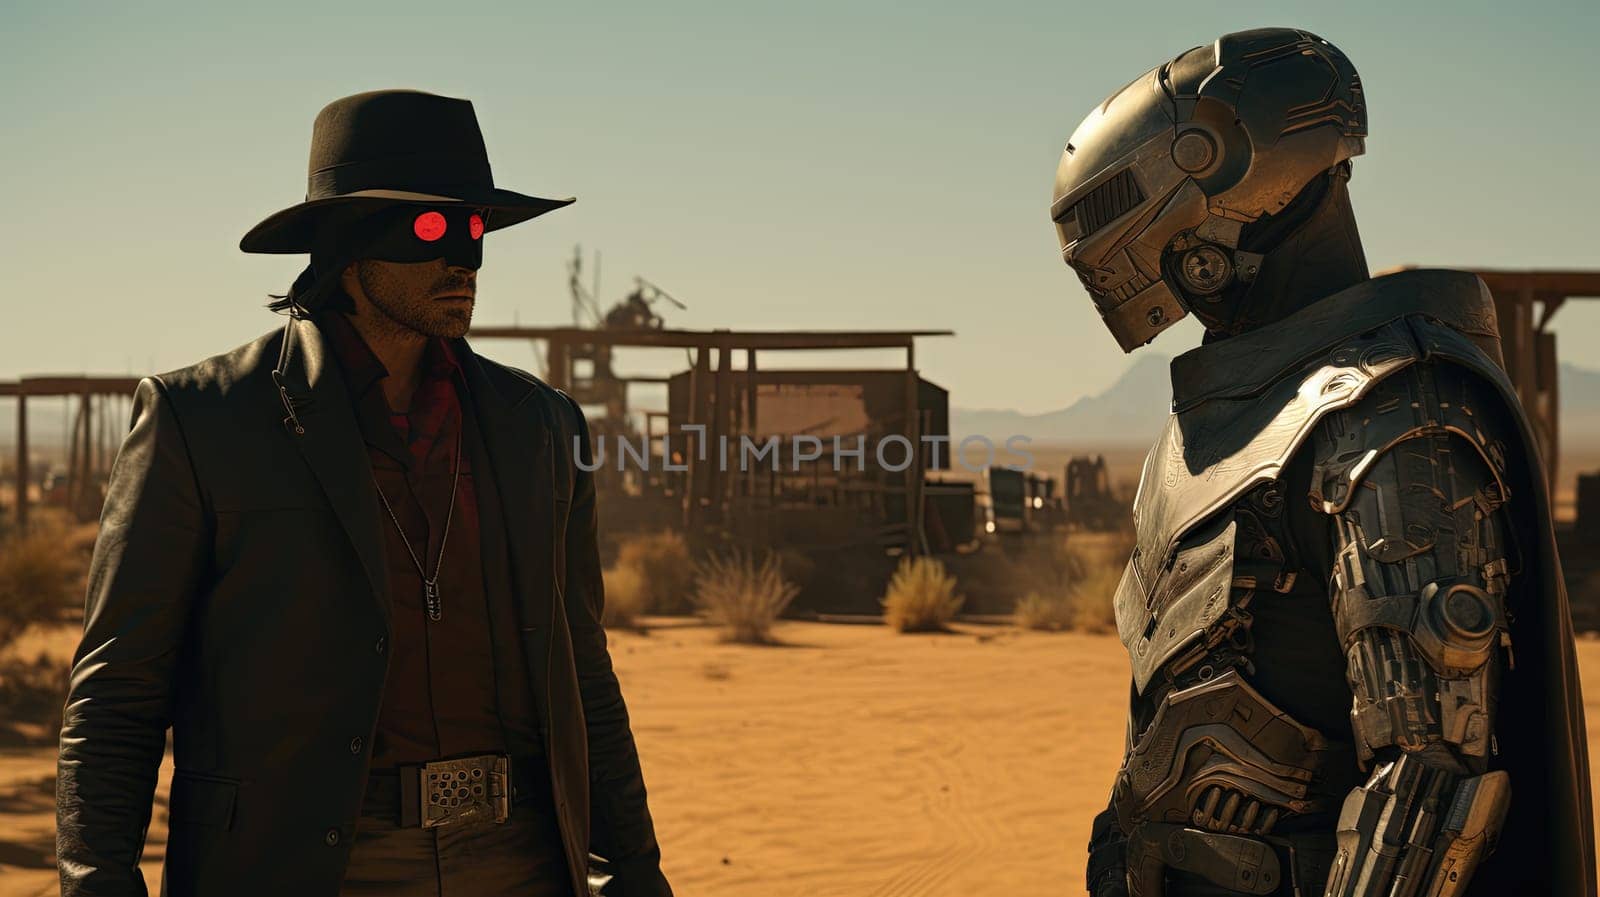 Space cowboys in sci-fi western scene. Sci-fi warriors of the wasteland. Generated AI by SwillKch